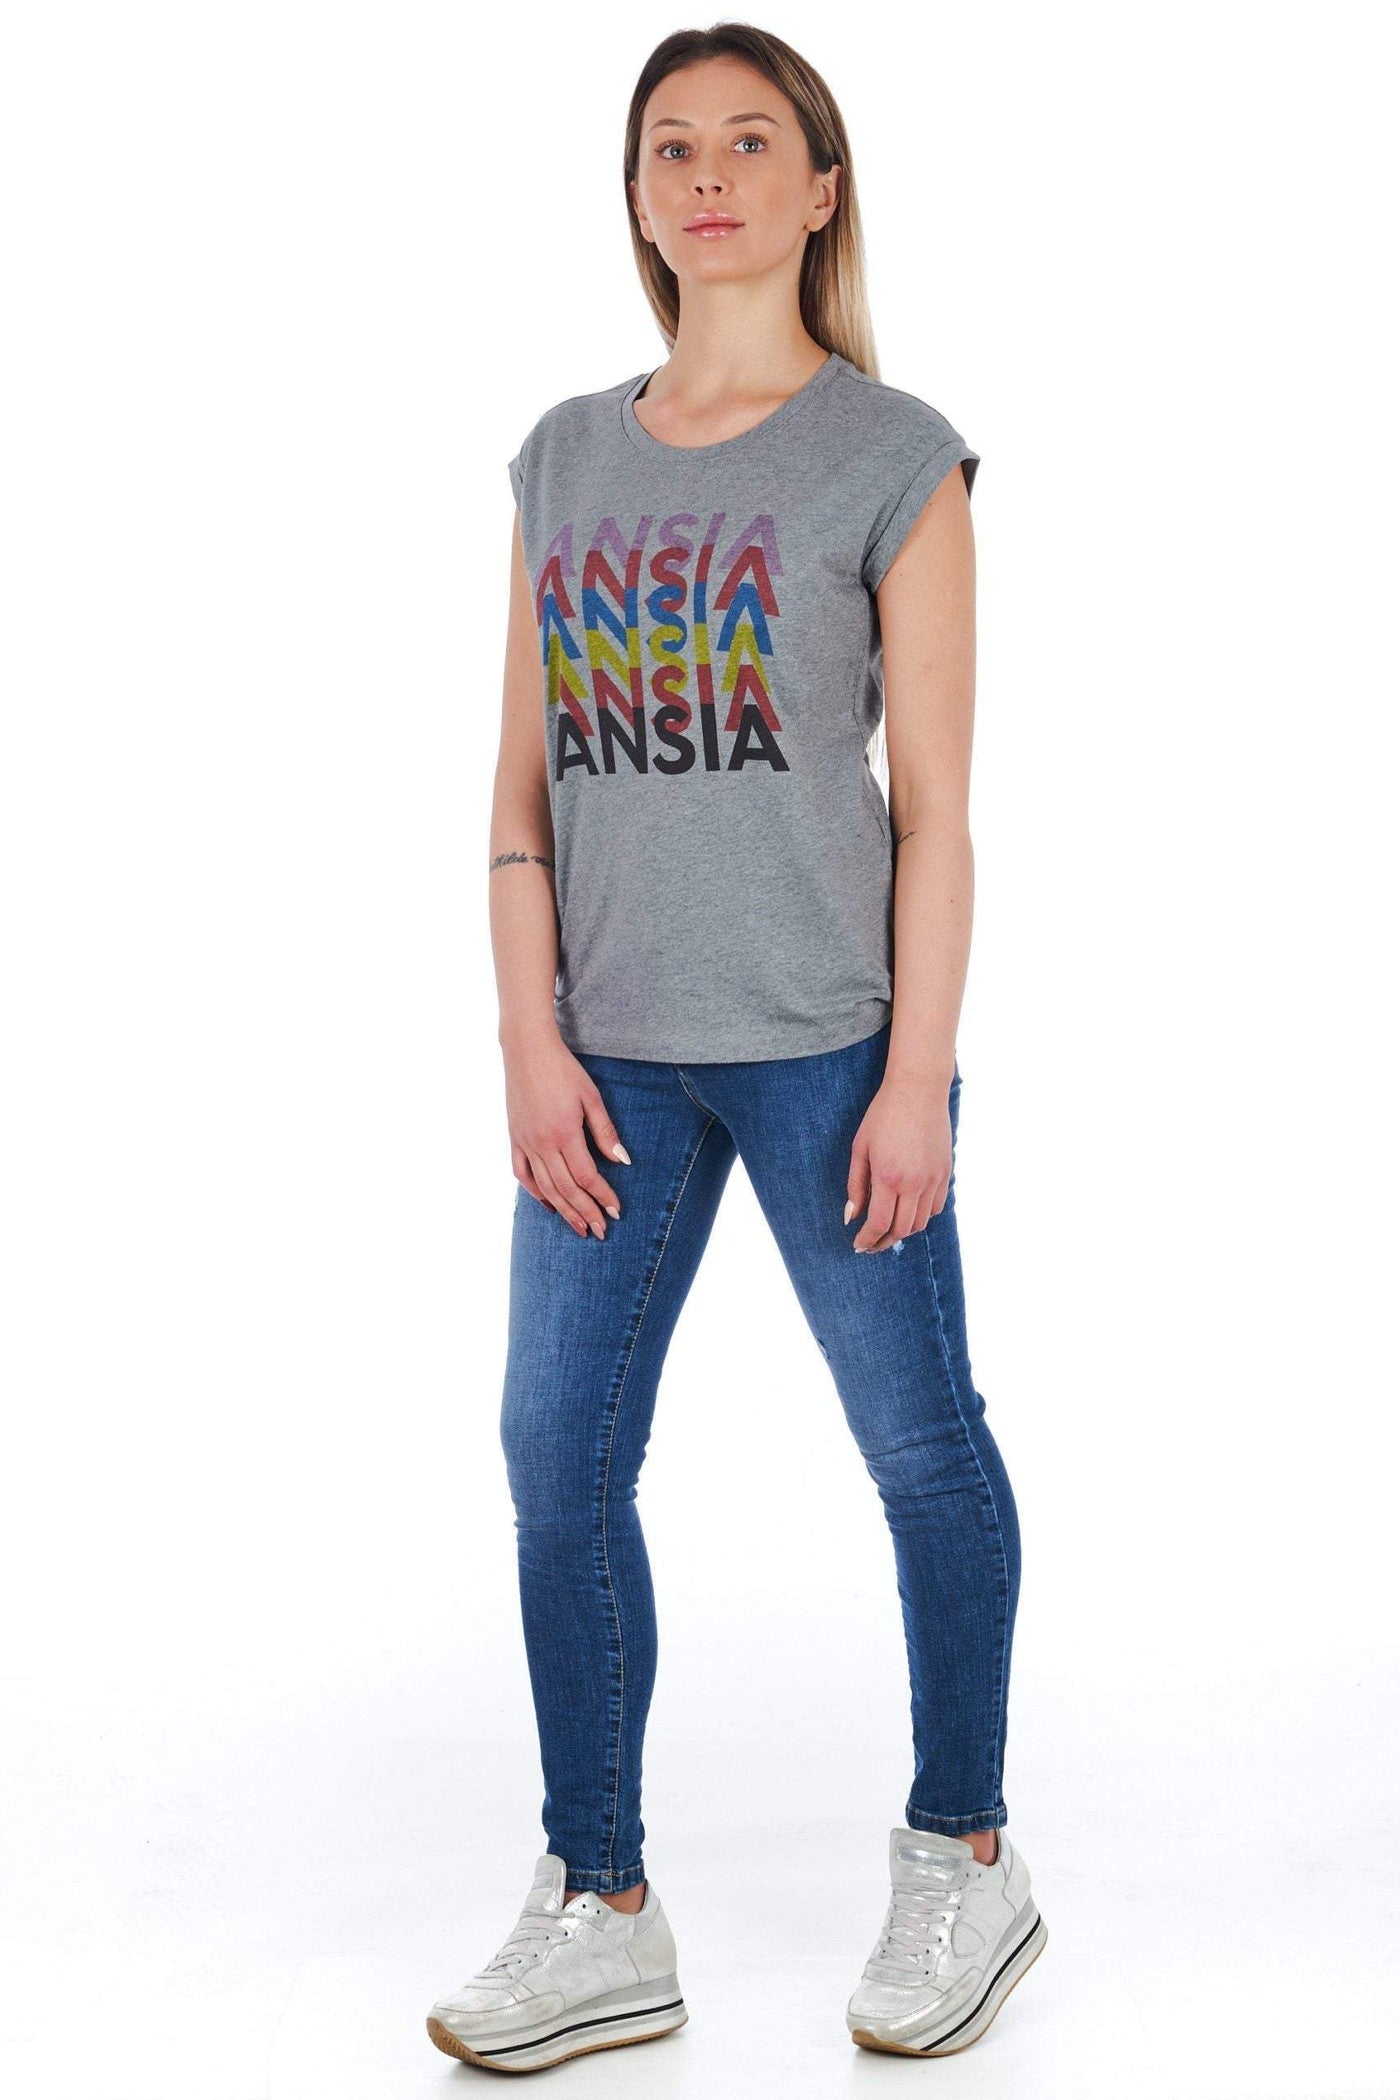 Frankie Morello printed Tops & T-Shirt #women, feed-agegroup-adult, feed-color-Gray, feed-gender-female, Frankie Morello, Gray, L, M, S, Tops & T-Shirts - Women - Clothing, XS at SEYMAYKA